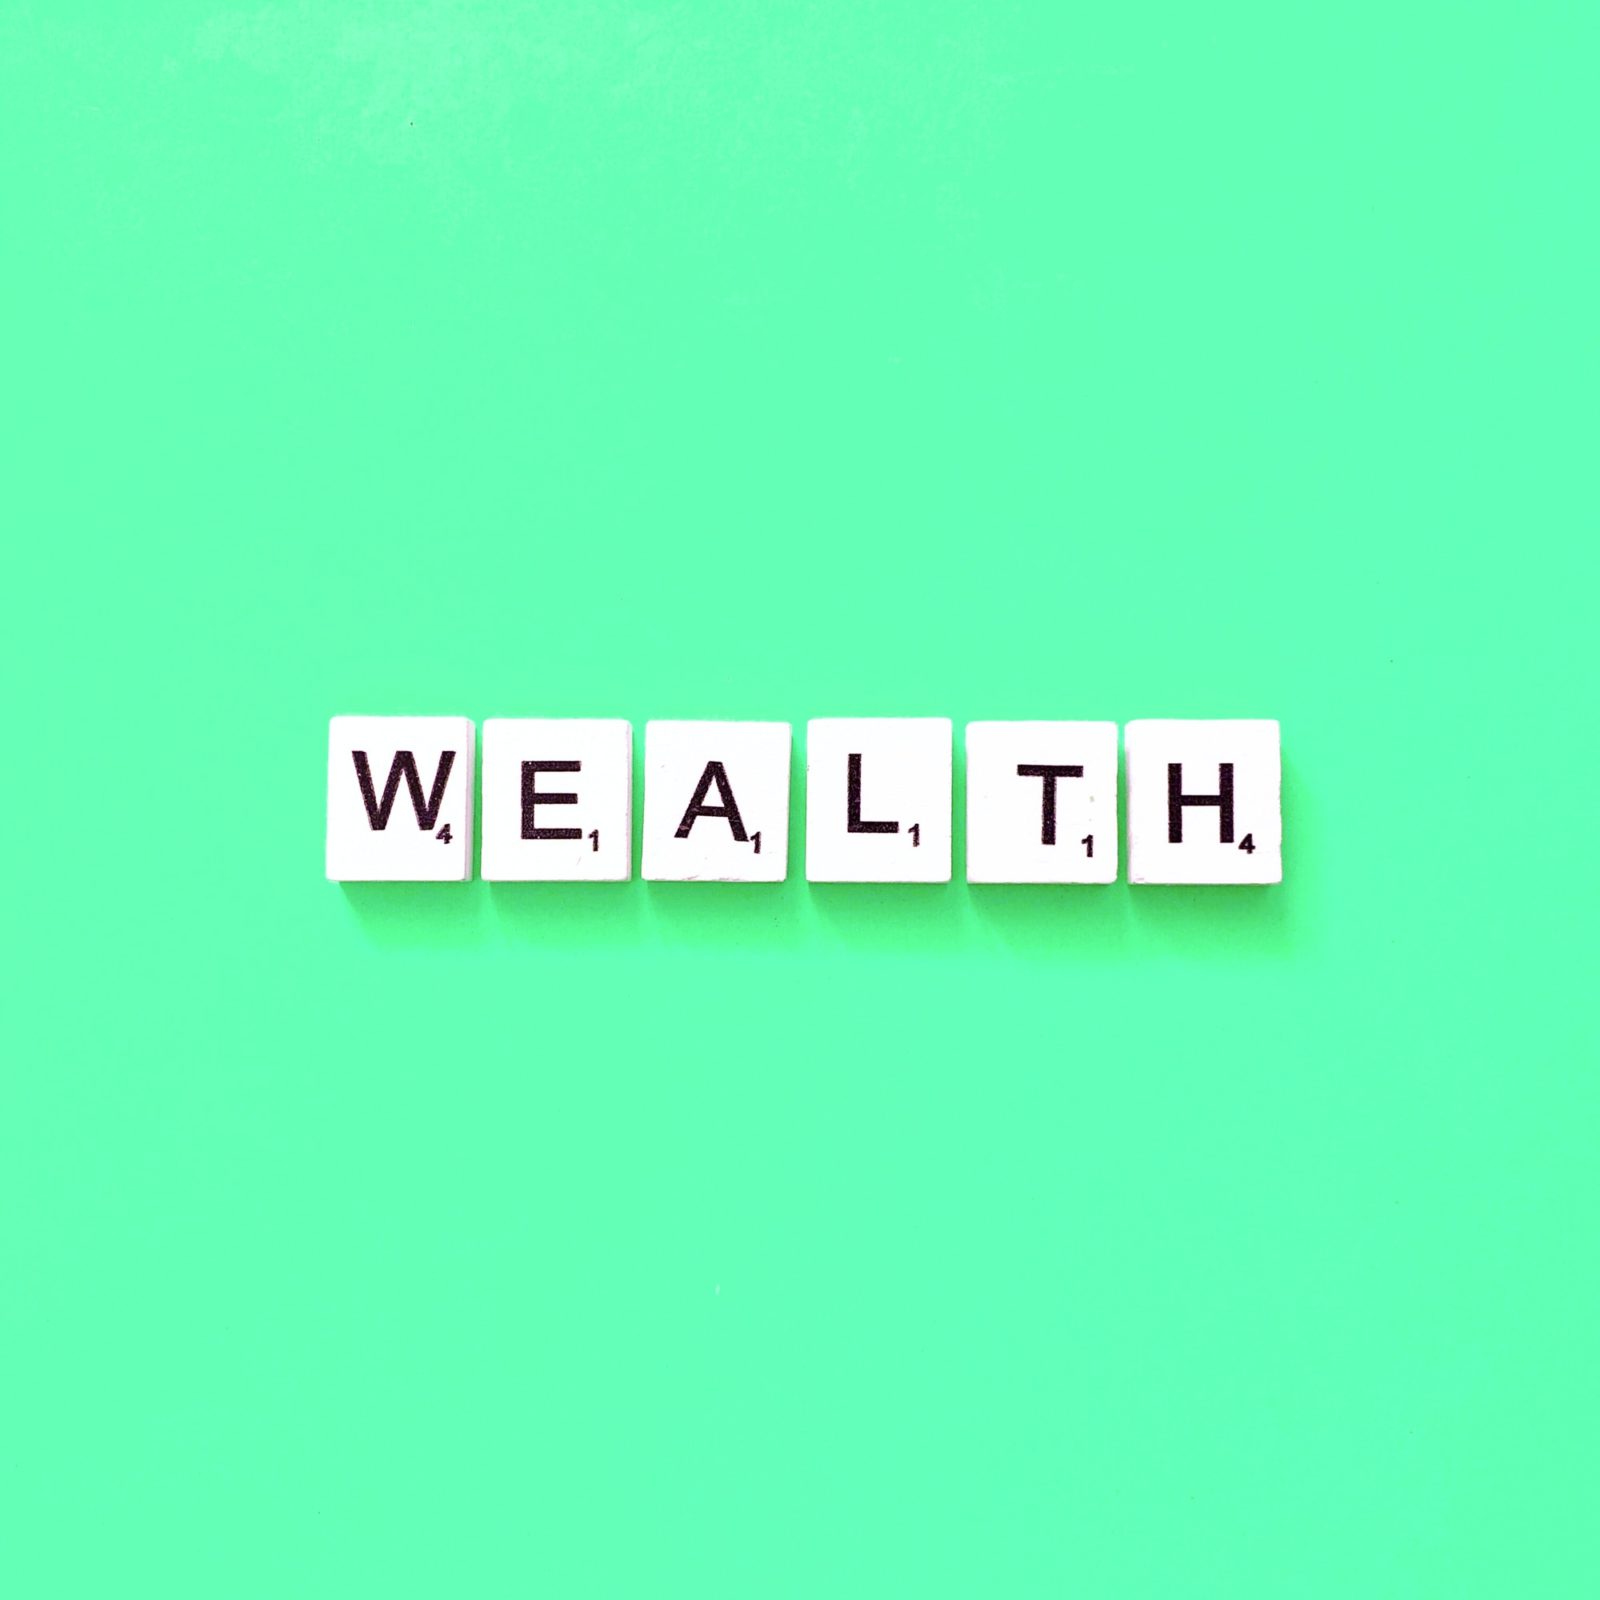 How much money does it take to be wealthy?